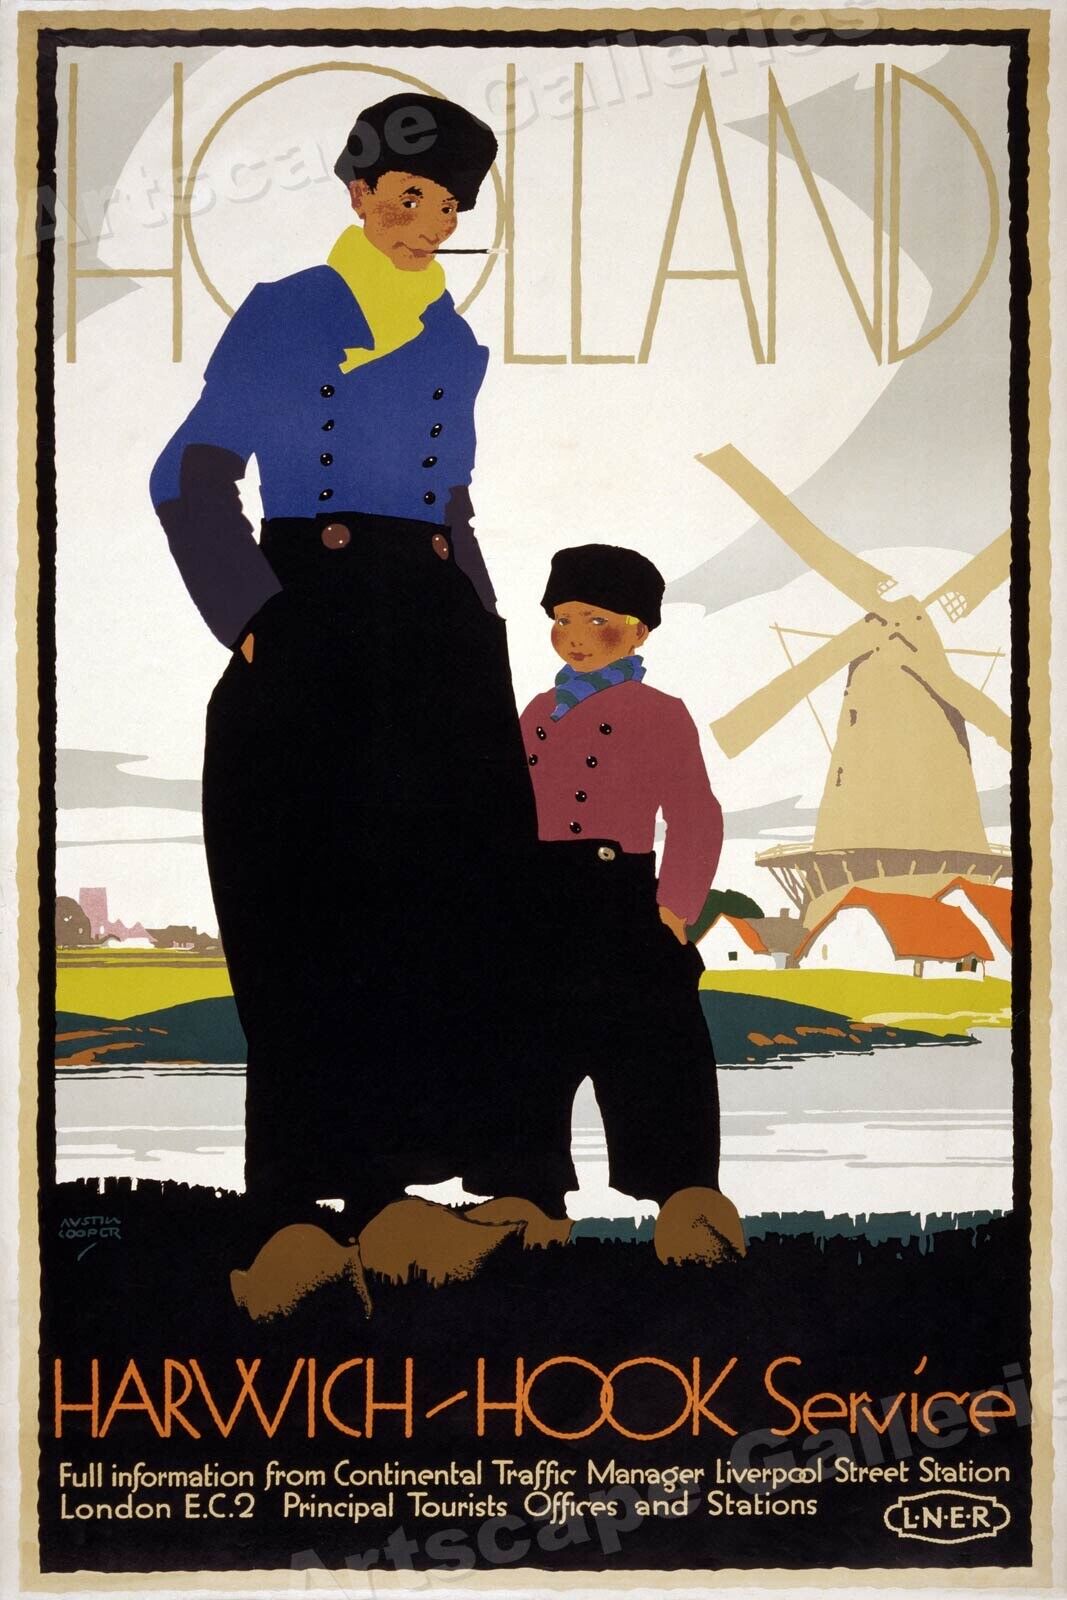 1920s Holland Harwich - Hook LNER Service Classic Train Travel Poster - 16x24